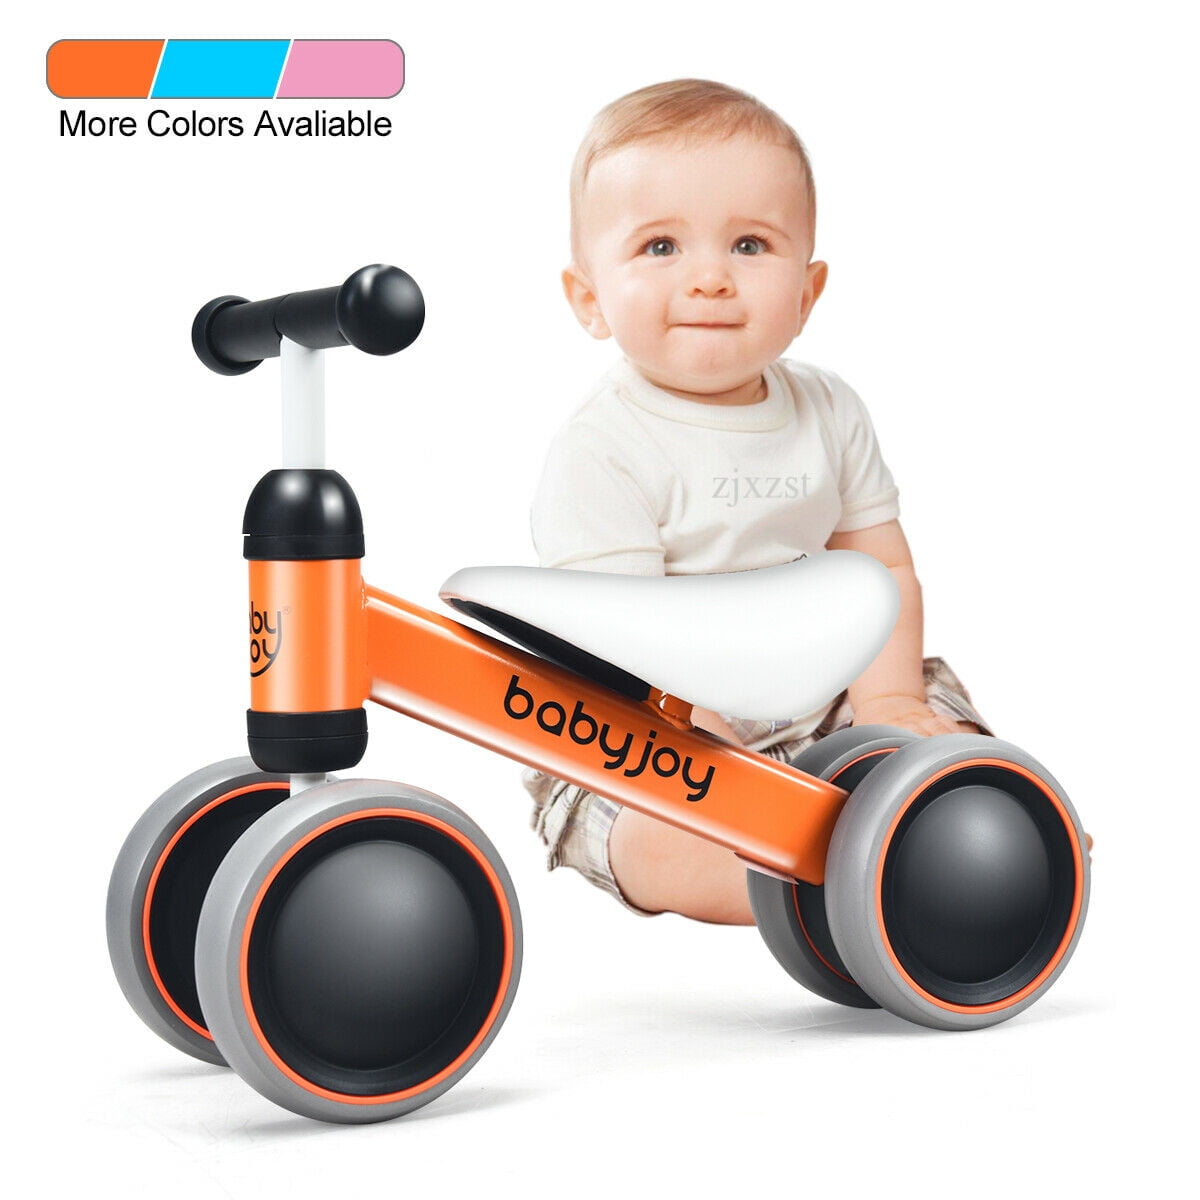 Cute Balance Bike for 1 Year Old Can Make Your Baby to Study Walk Toddler Balance Bike is a for Your Cute Baby Gimars Baby Balance Bike with Adjustable Seat